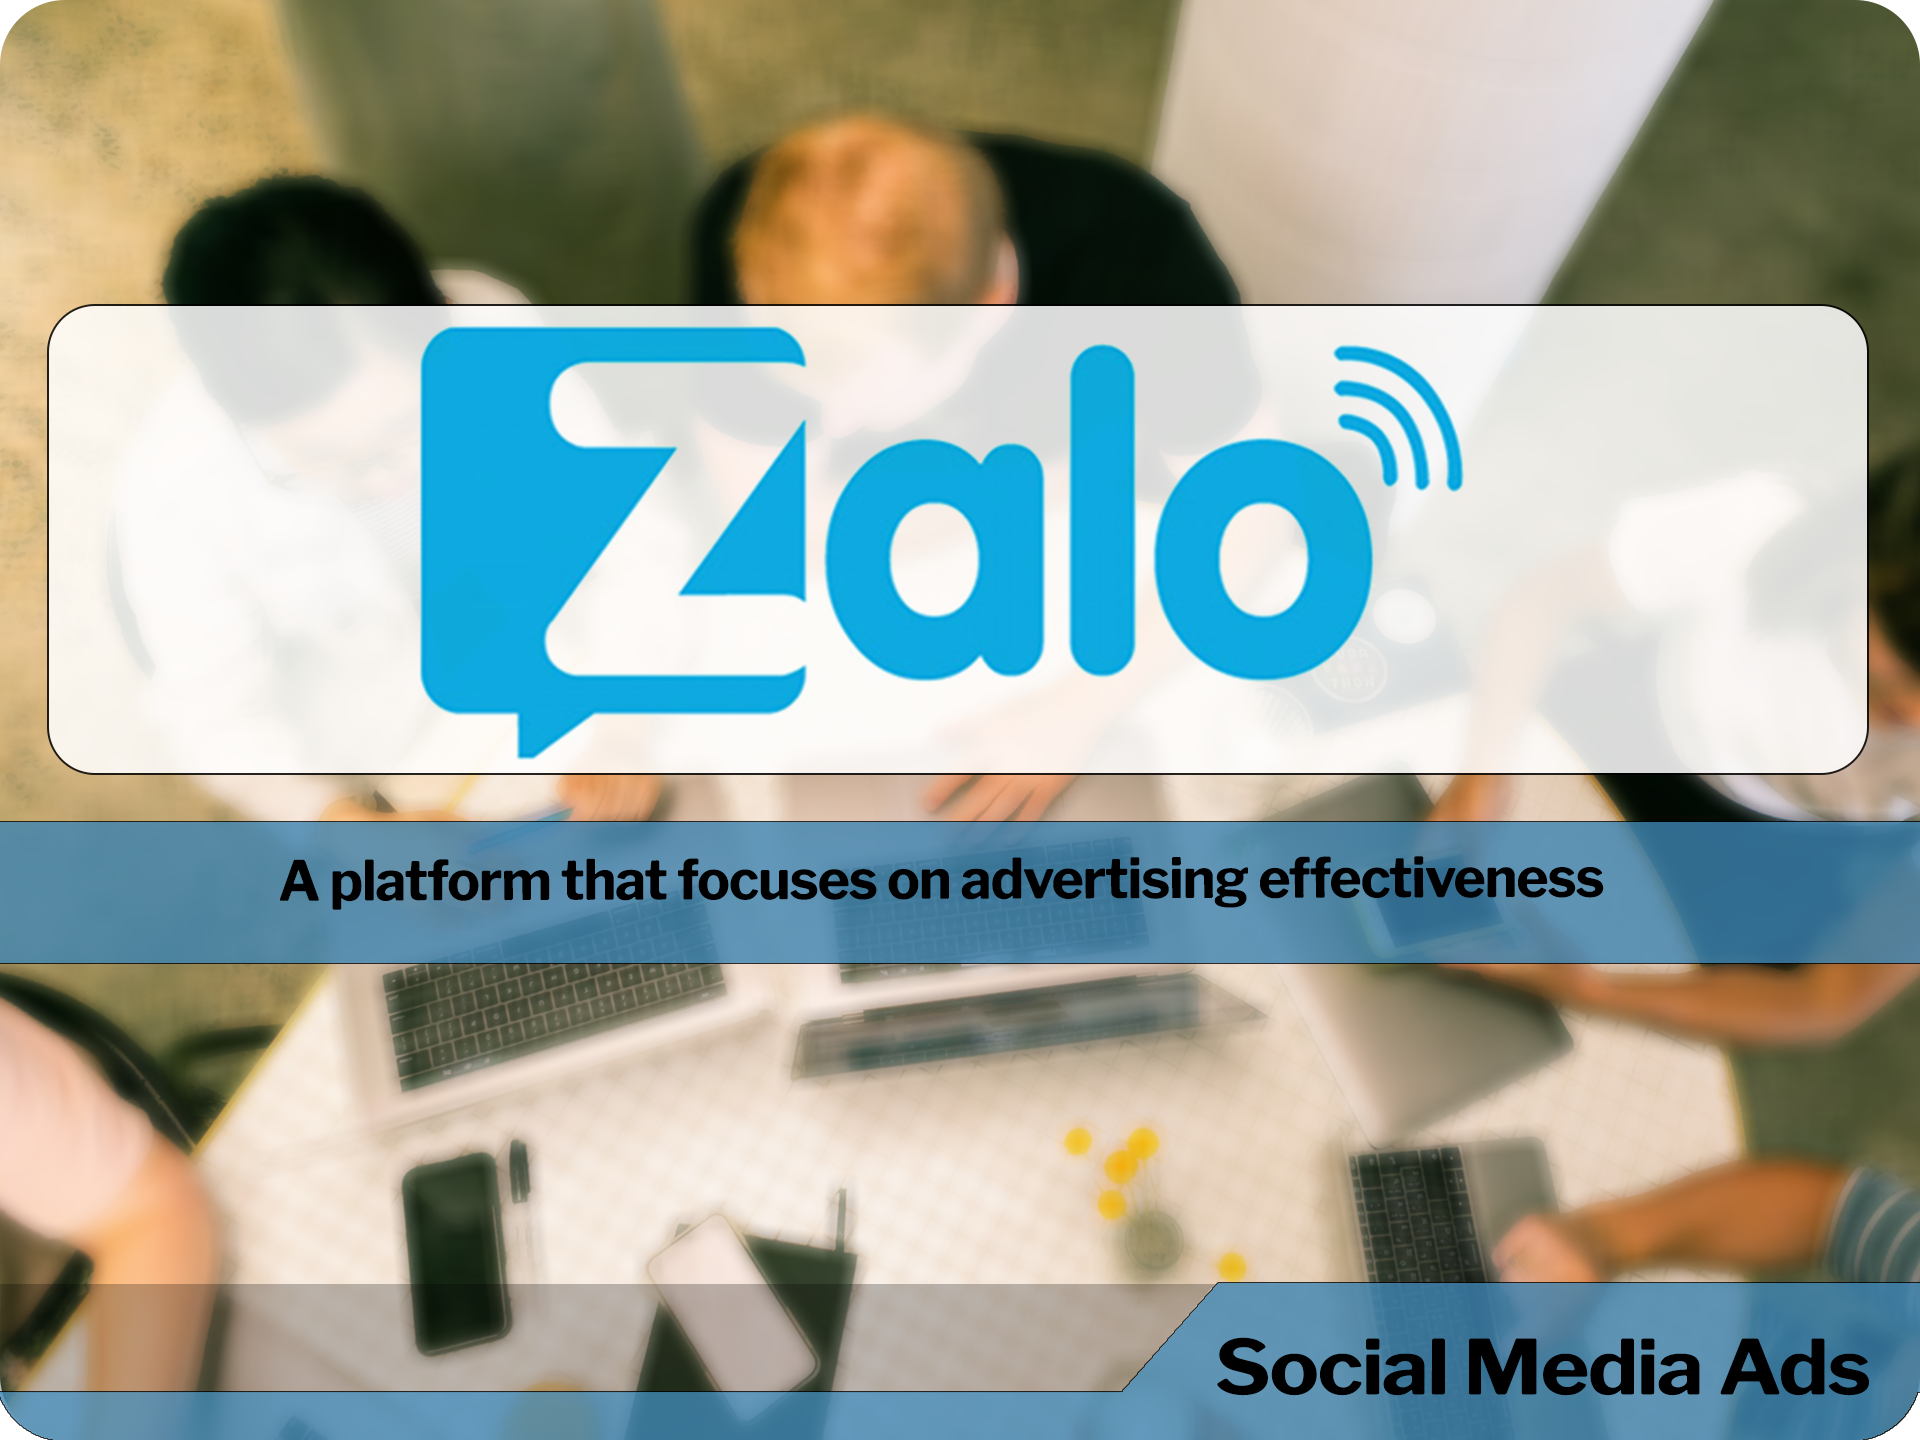 Reaching 100 million potential customers in the Zalo ecosystem